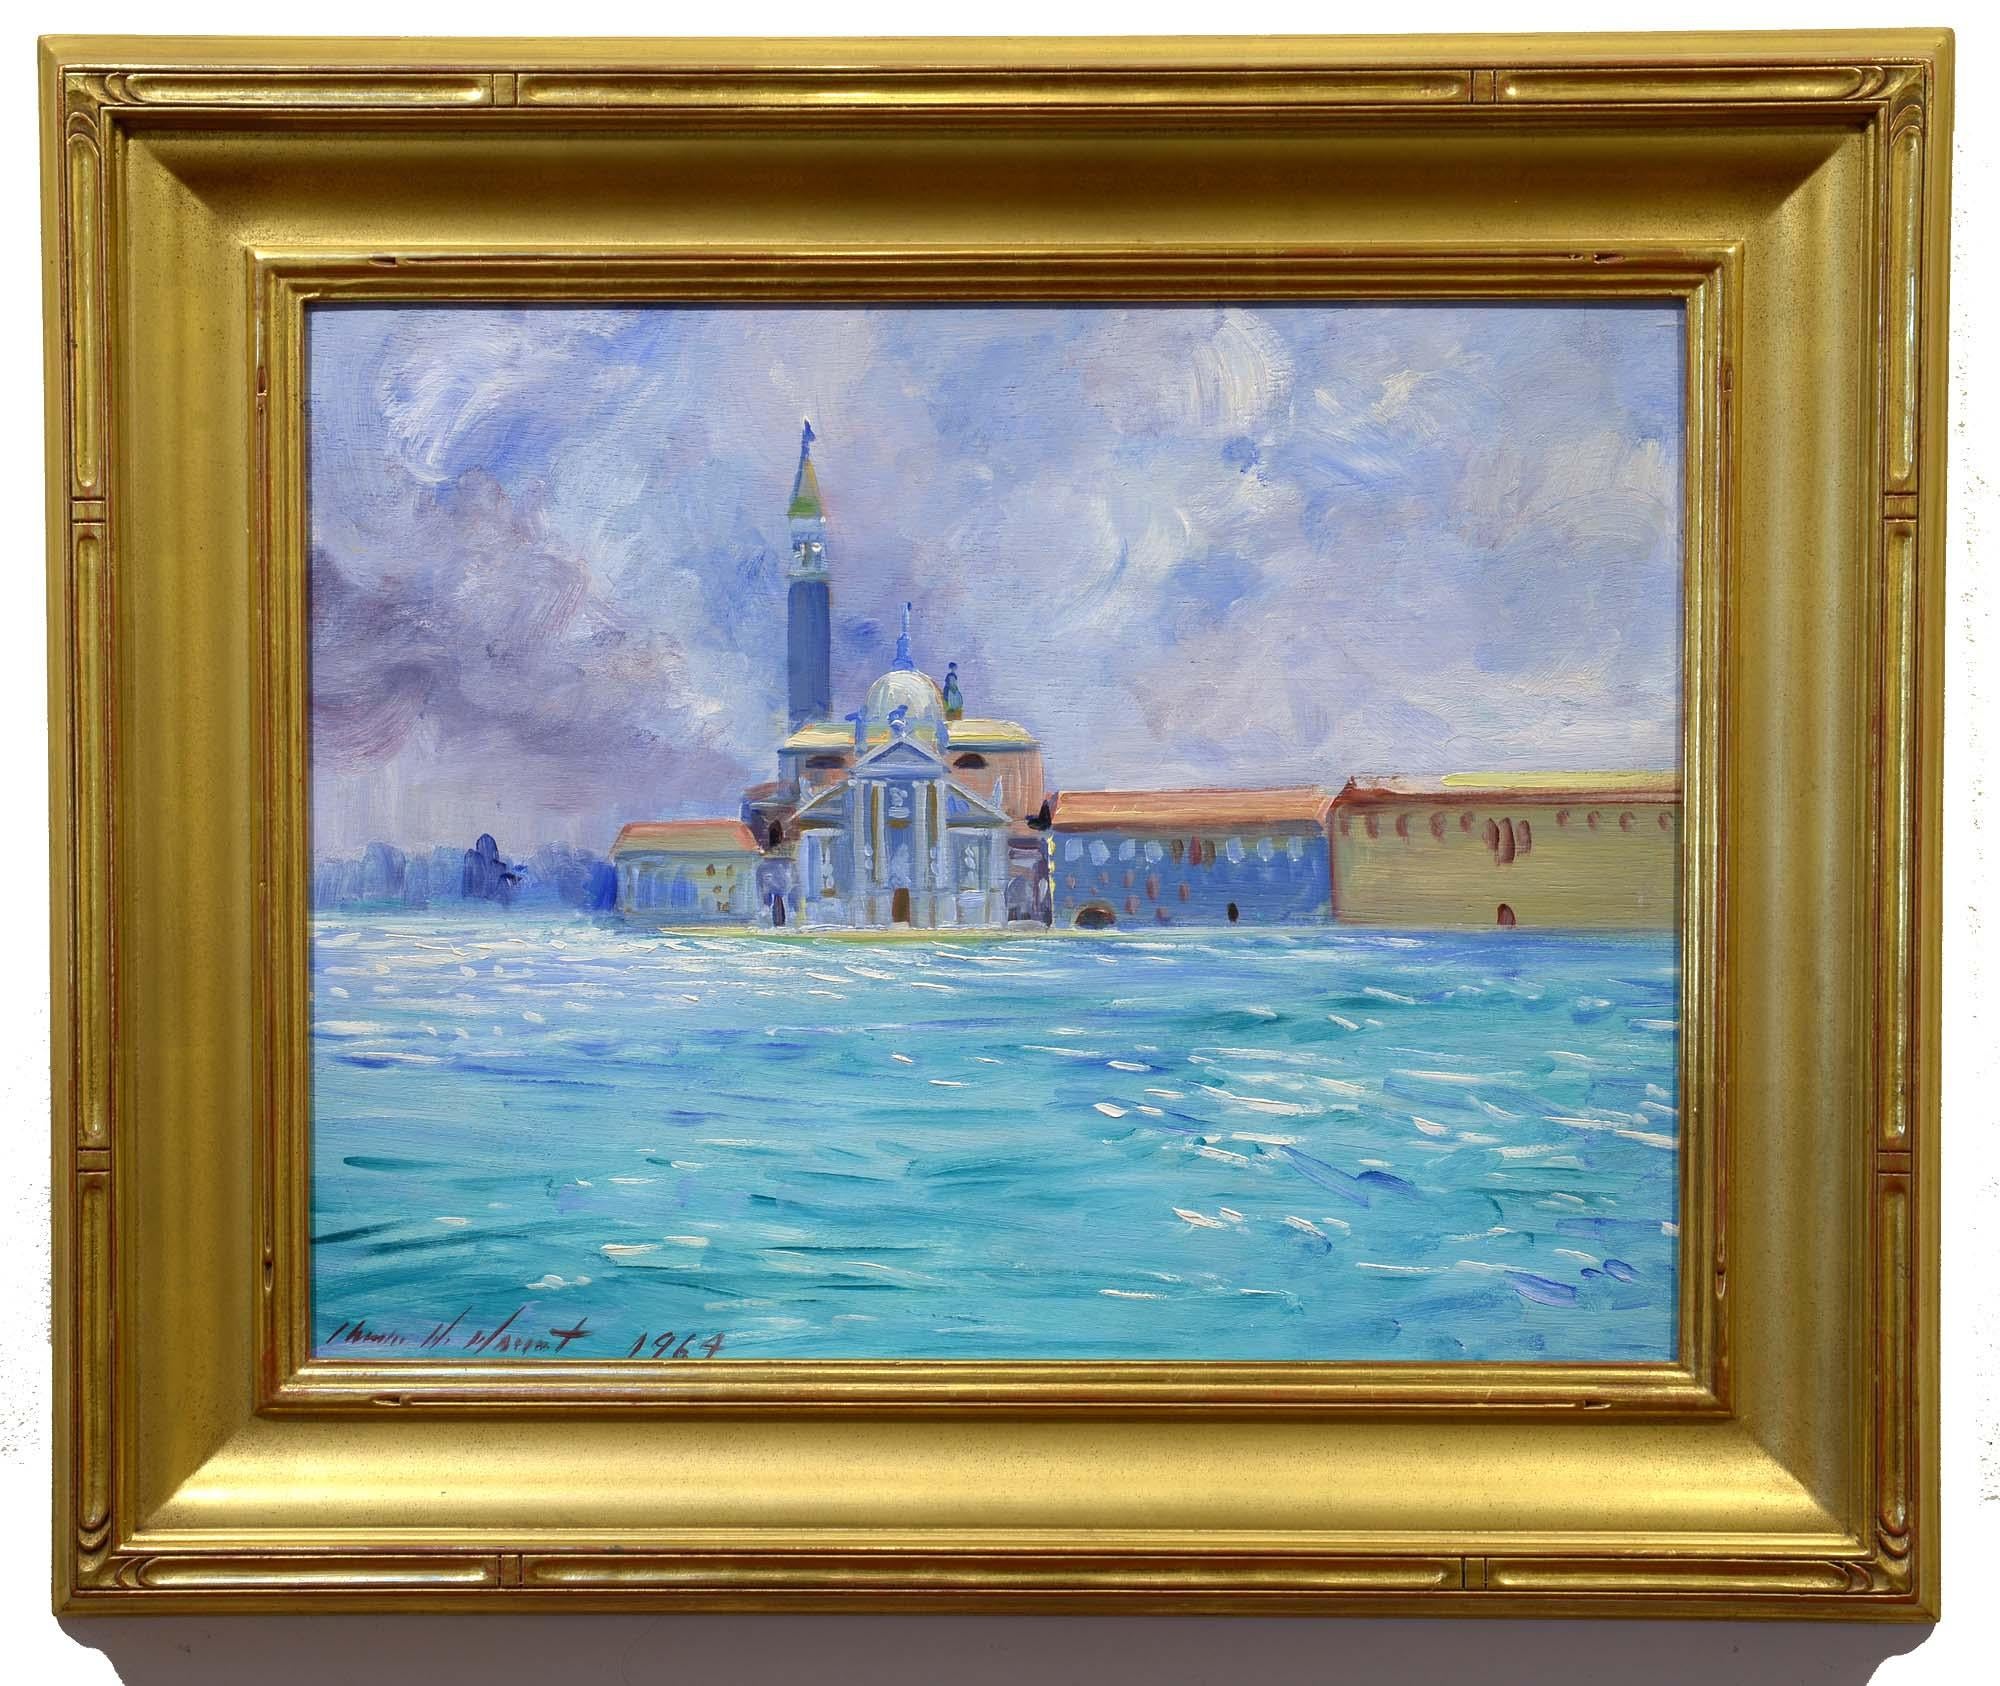 San Giorgio Maggiore, Venice, Italy, American Impressionist, Oil - Painting by Charles Merrill Mount